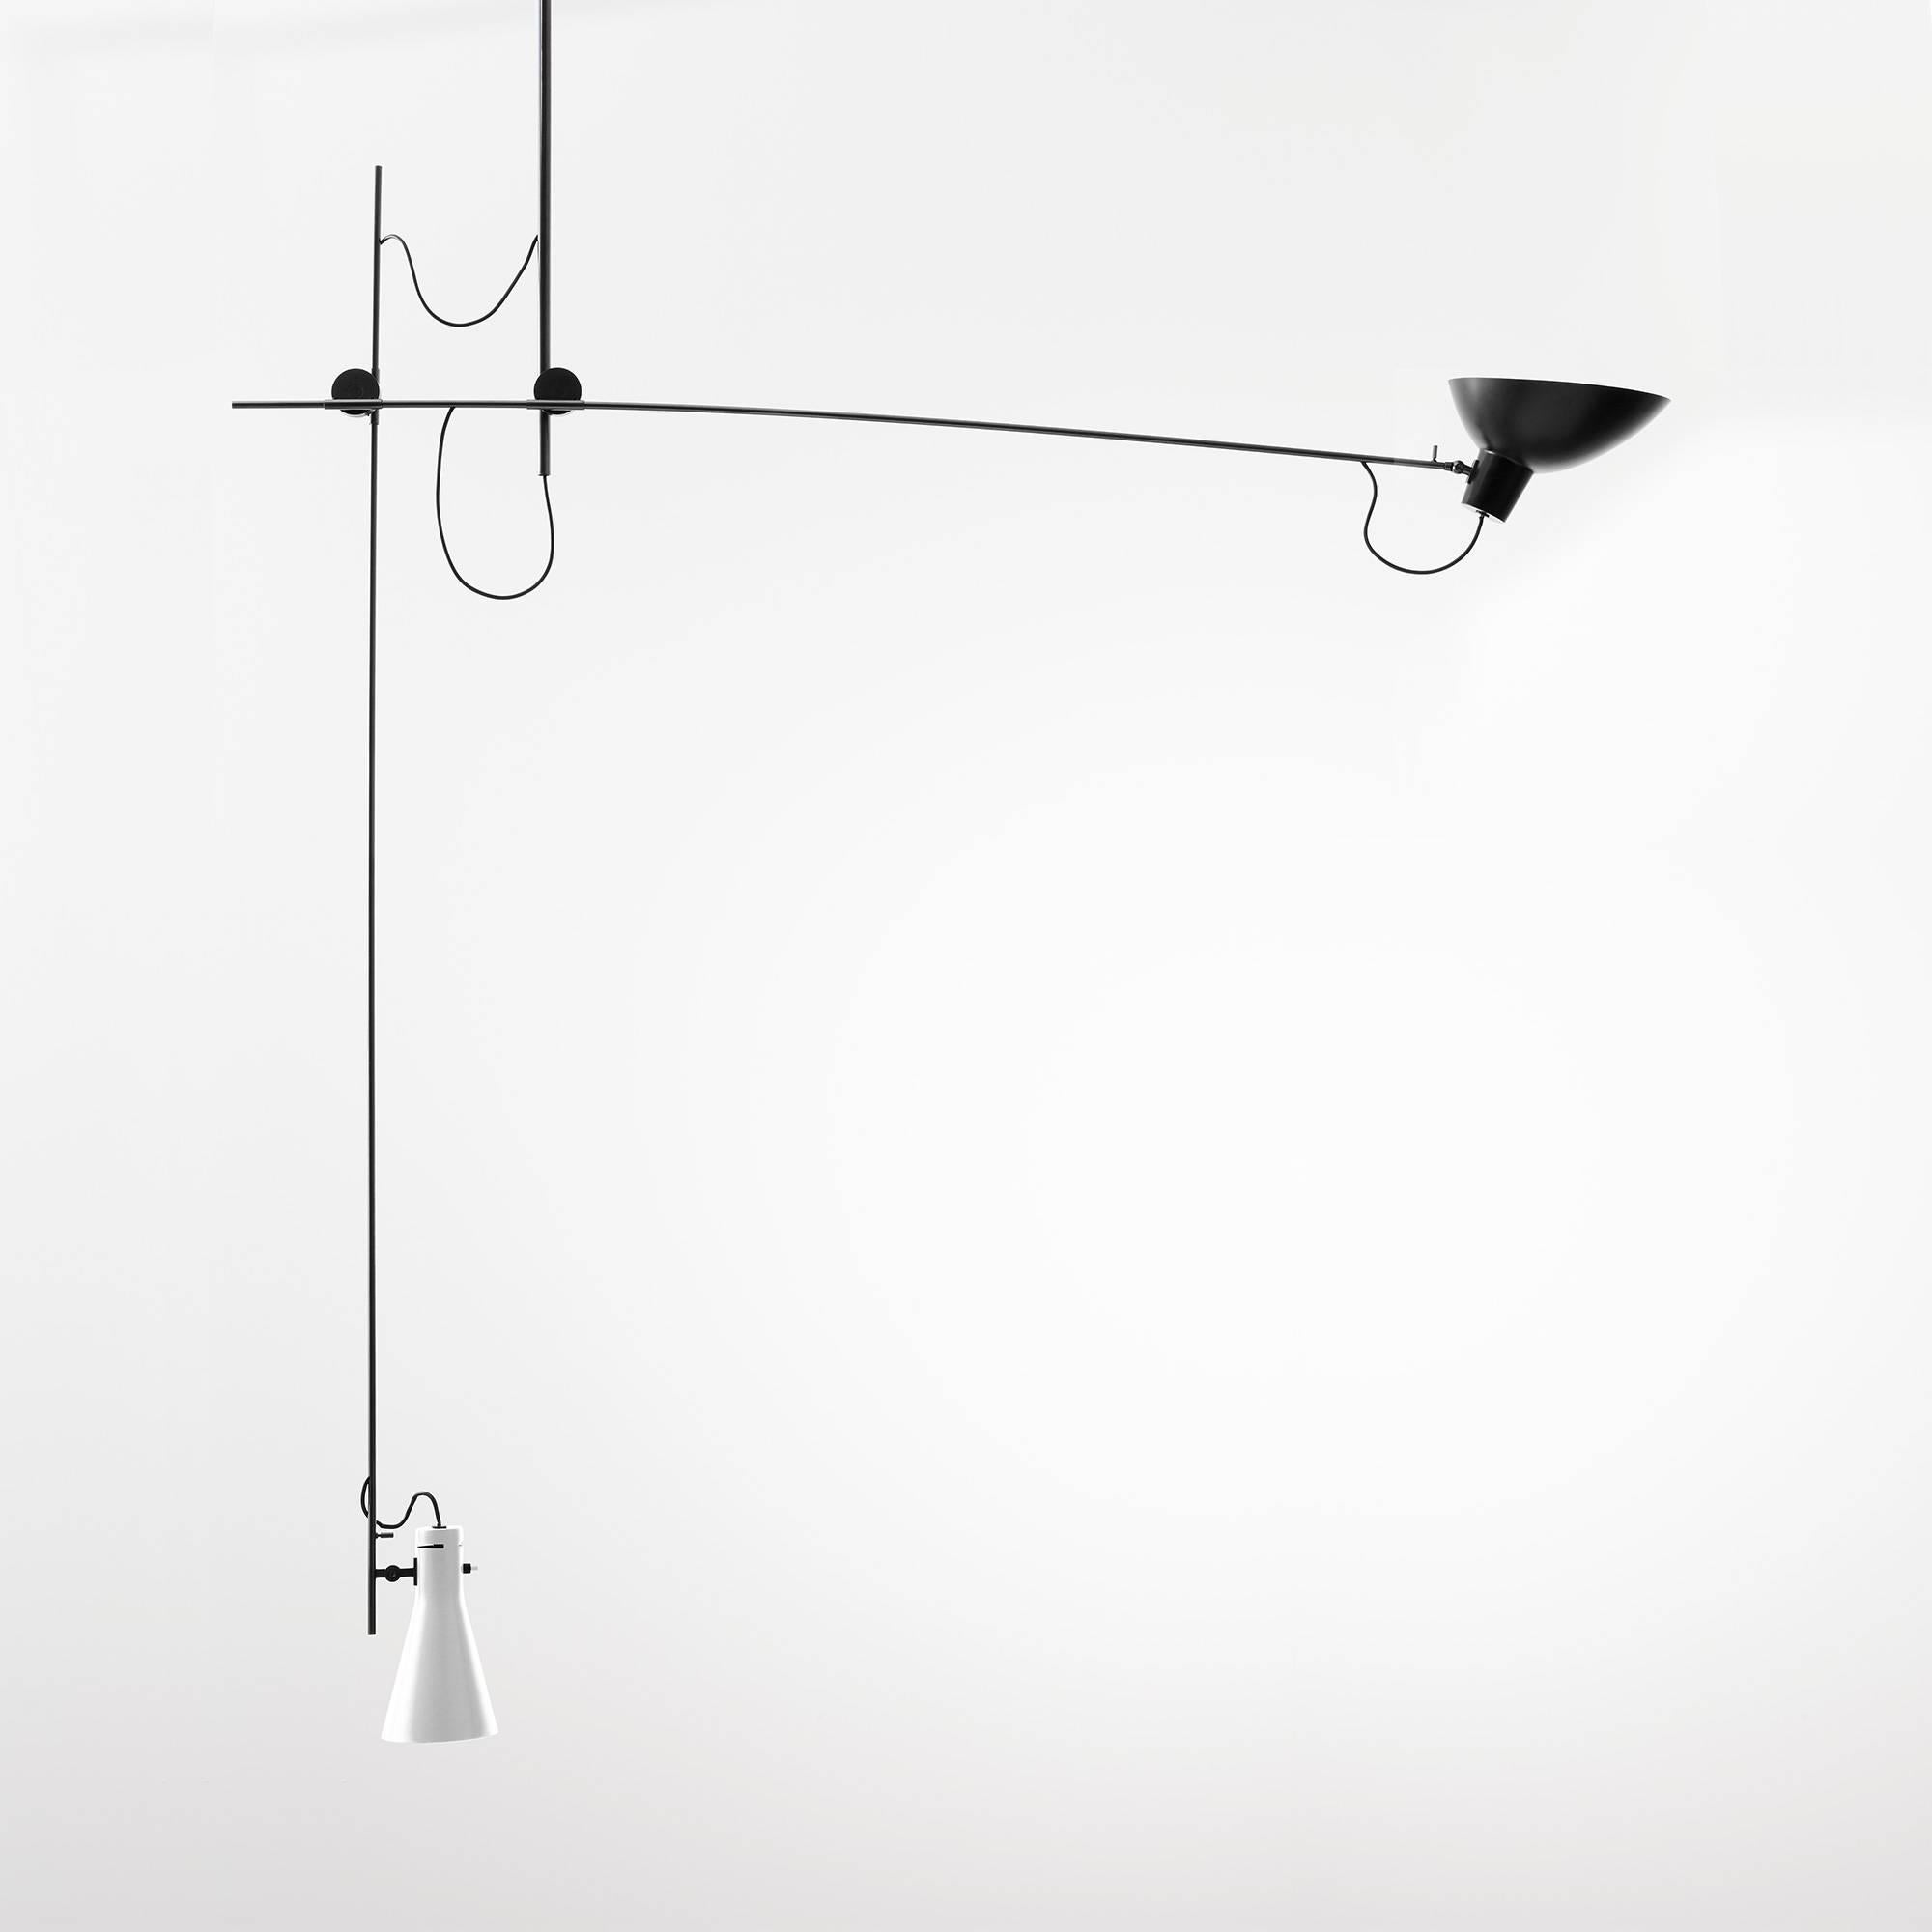 Enameled Vittoriano Viganò 'VV Suspension' Lamp in Black and Red